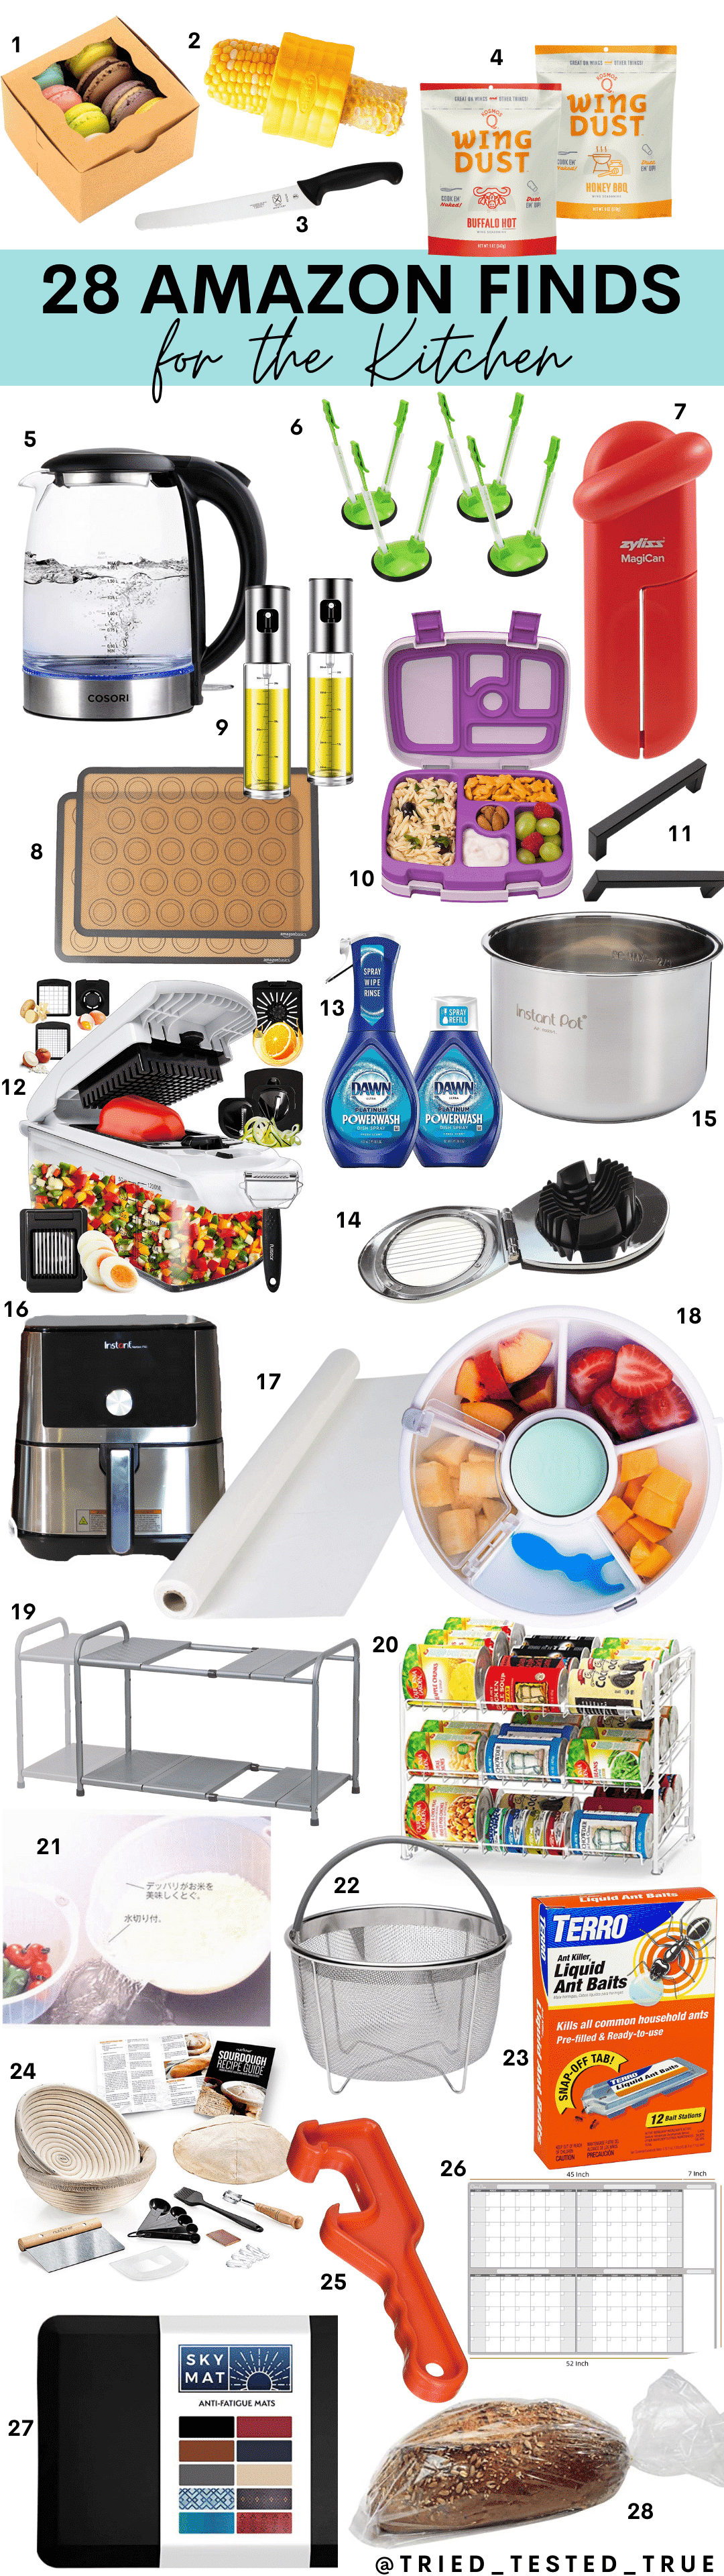 28 amazon kitchen finds i actually use and love - video